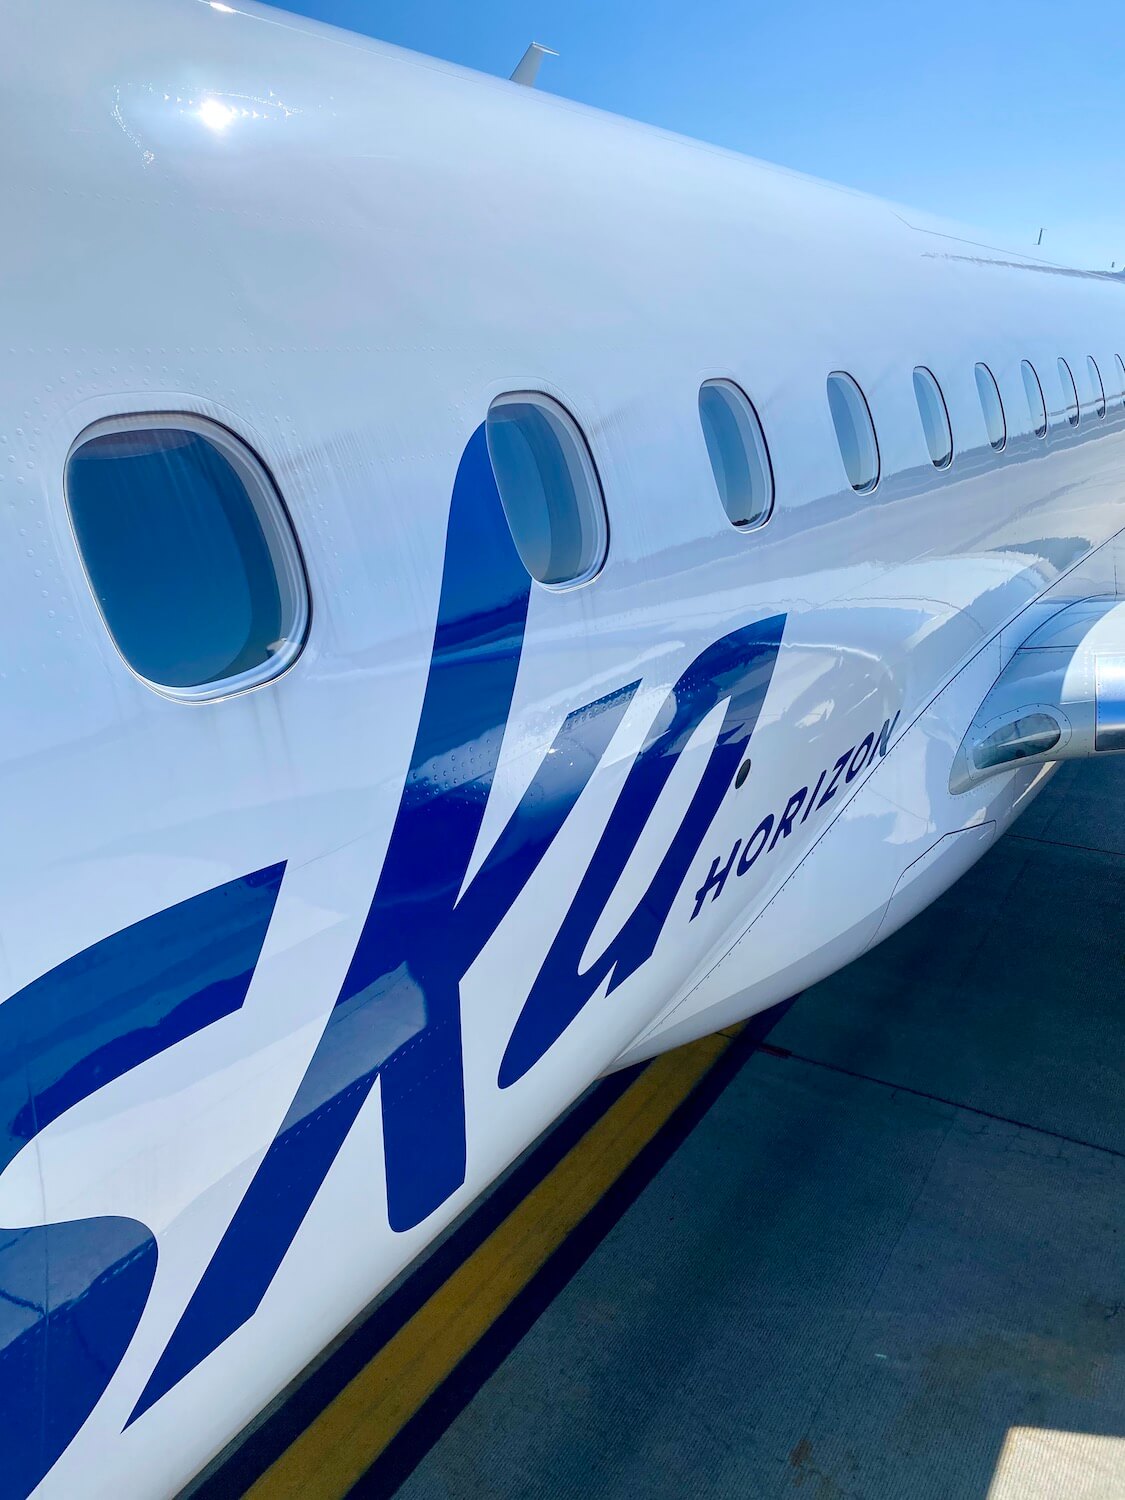 This close up shot of a Horizon Air E175 highlights the bright blue lettering on white paint and the yellow aircraft J line below is painted on the pavement.  The sky above is blue. 